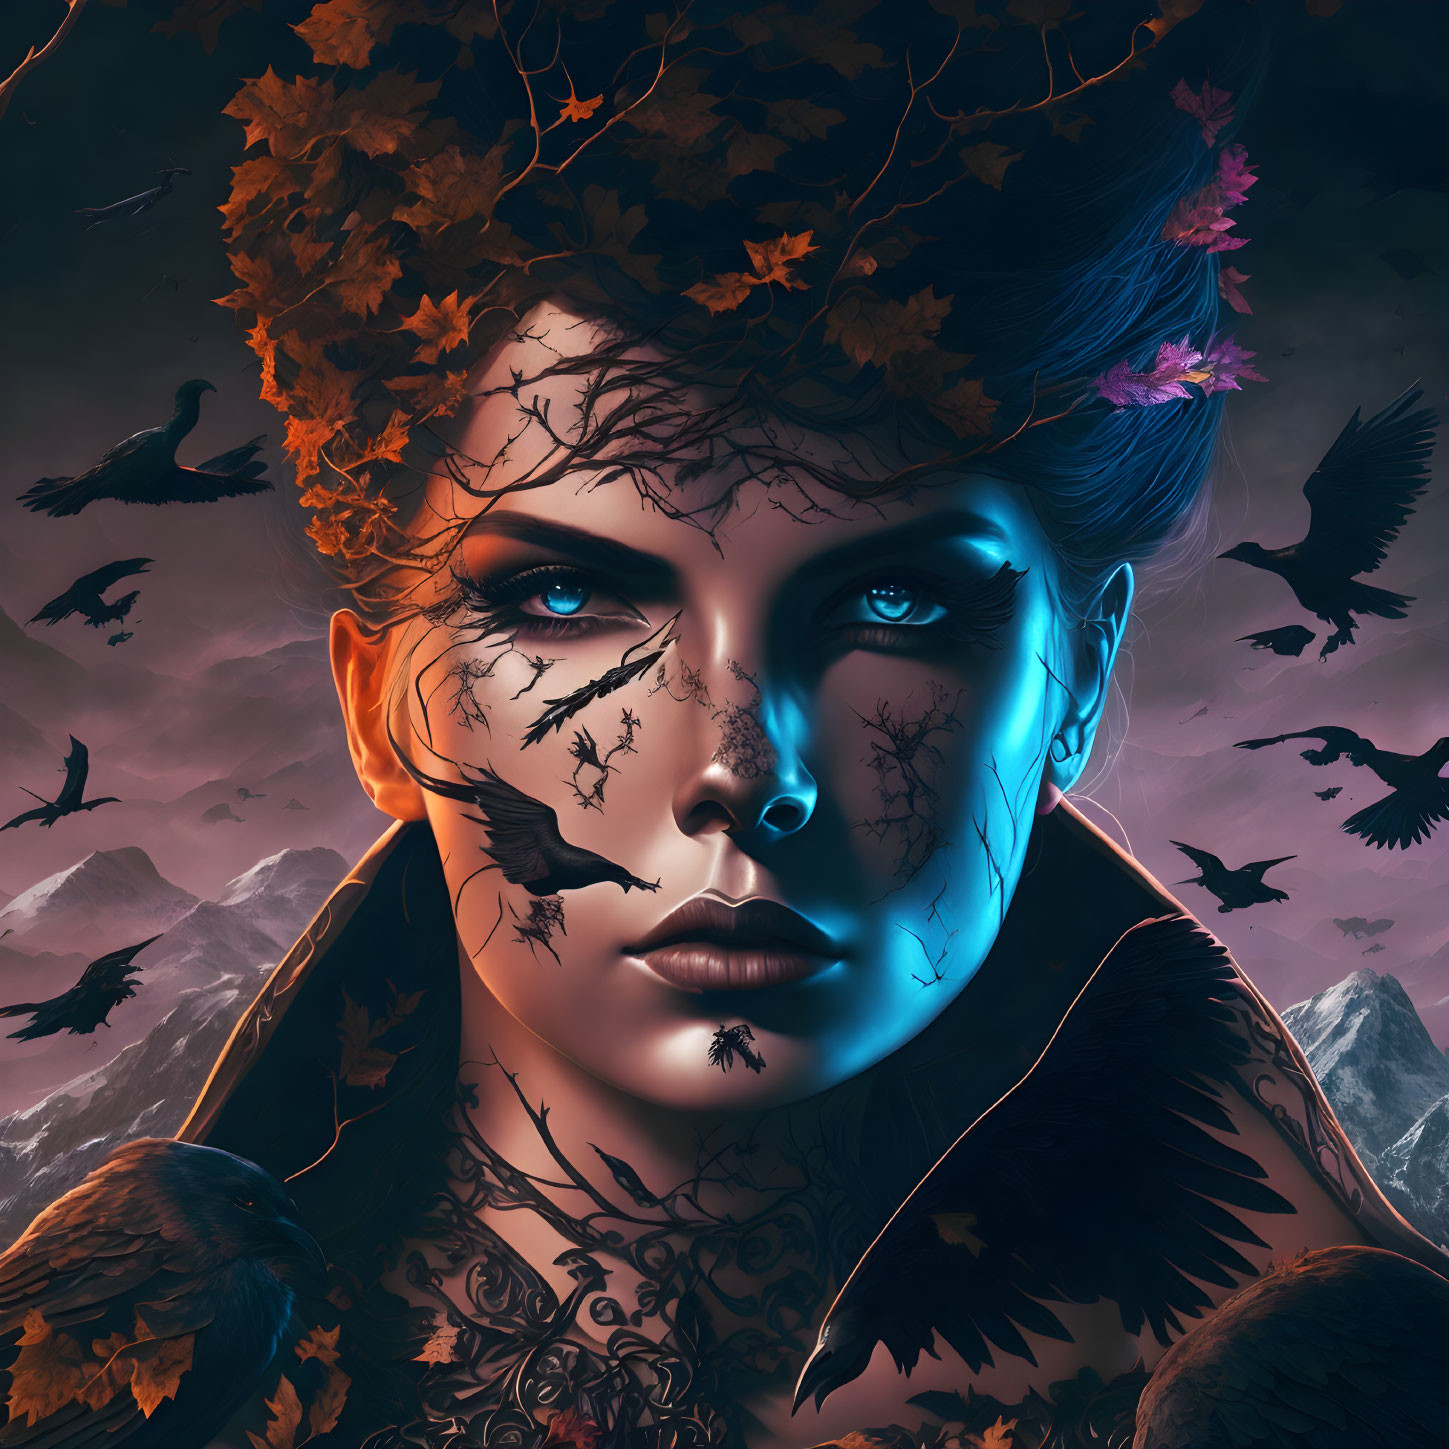 Digital artwork: Woman with autumn leaves, tattoos, cracked face, crows, and mountains